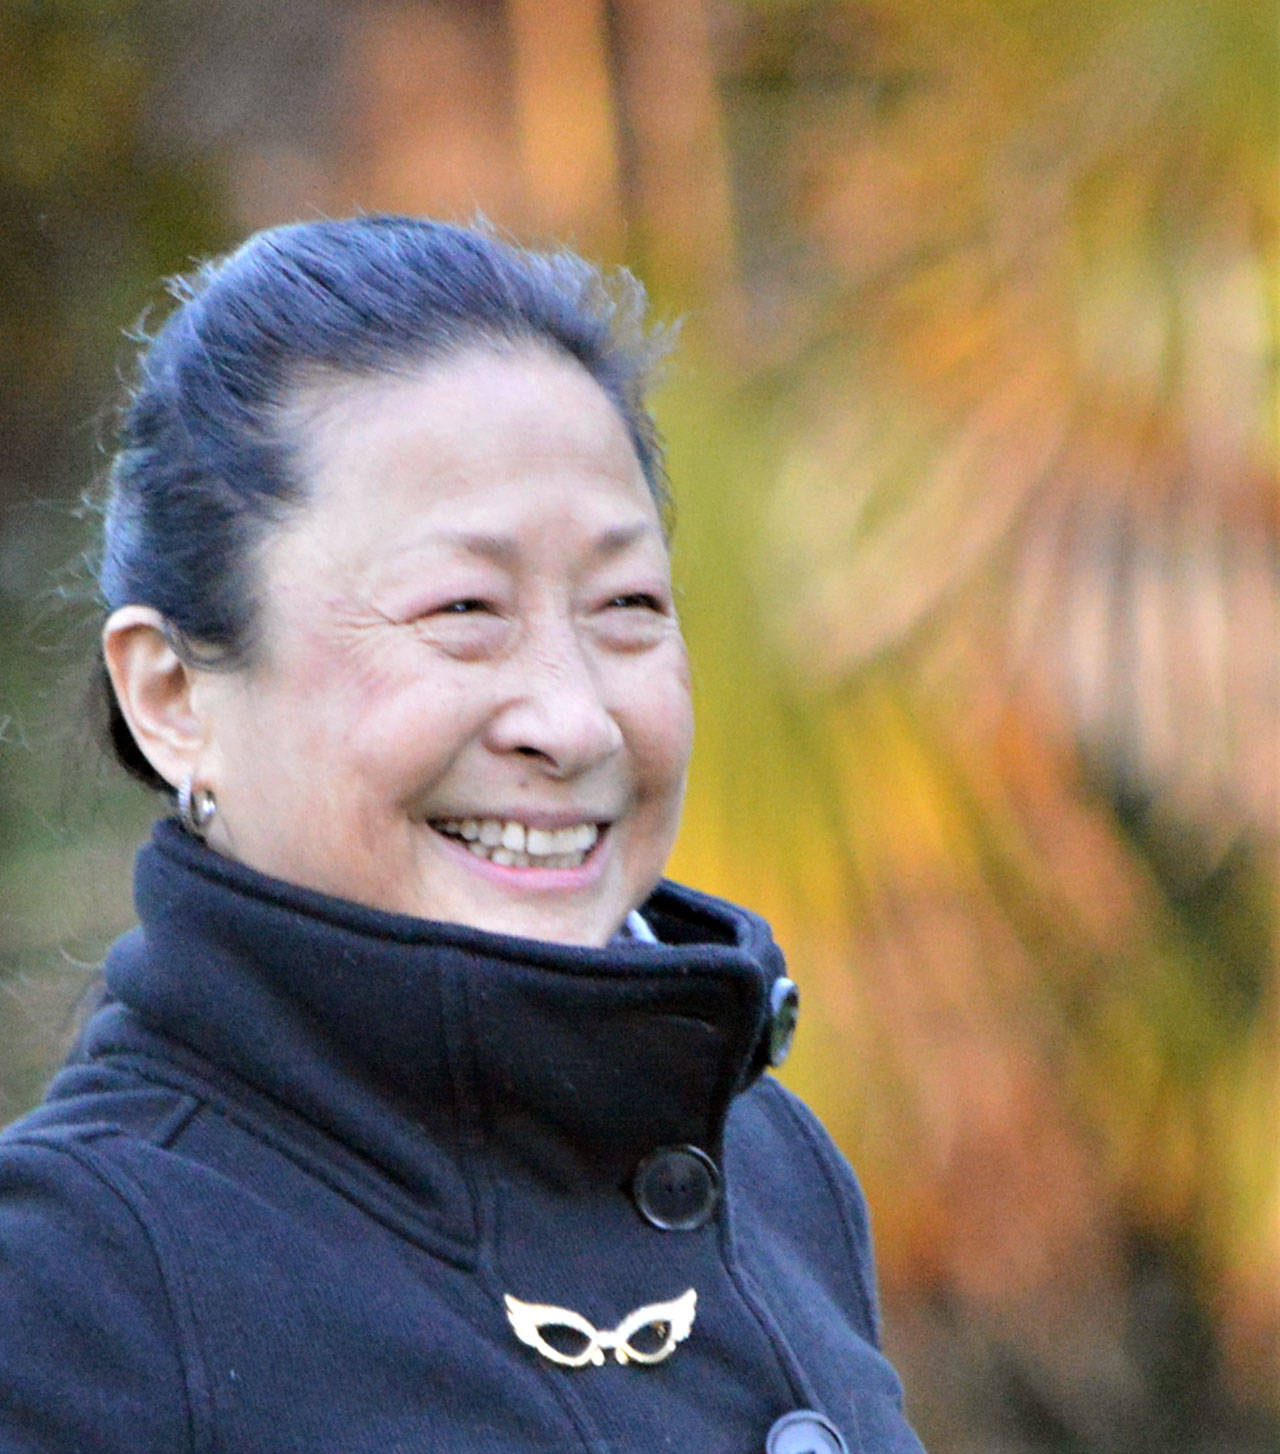 Ling Hui has taught for some 25 years at her studio in Port Townsend. (Diane Urbani de la Paz/Peninsula Daily News)